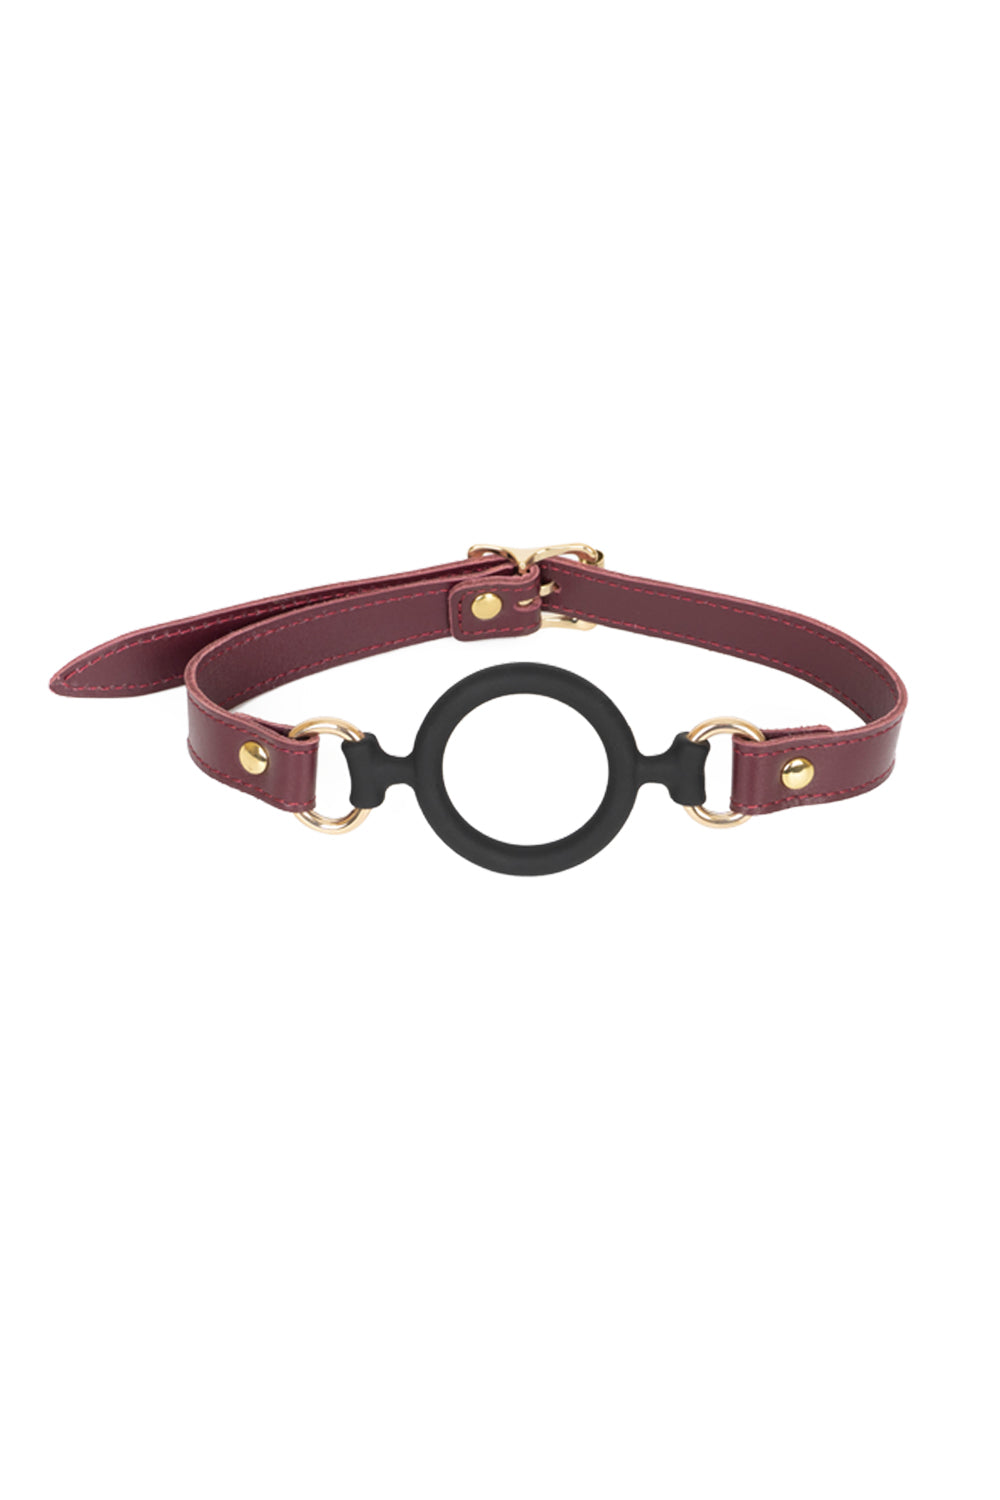 Soft Silicone Mouth Ring Gag. Burgundy